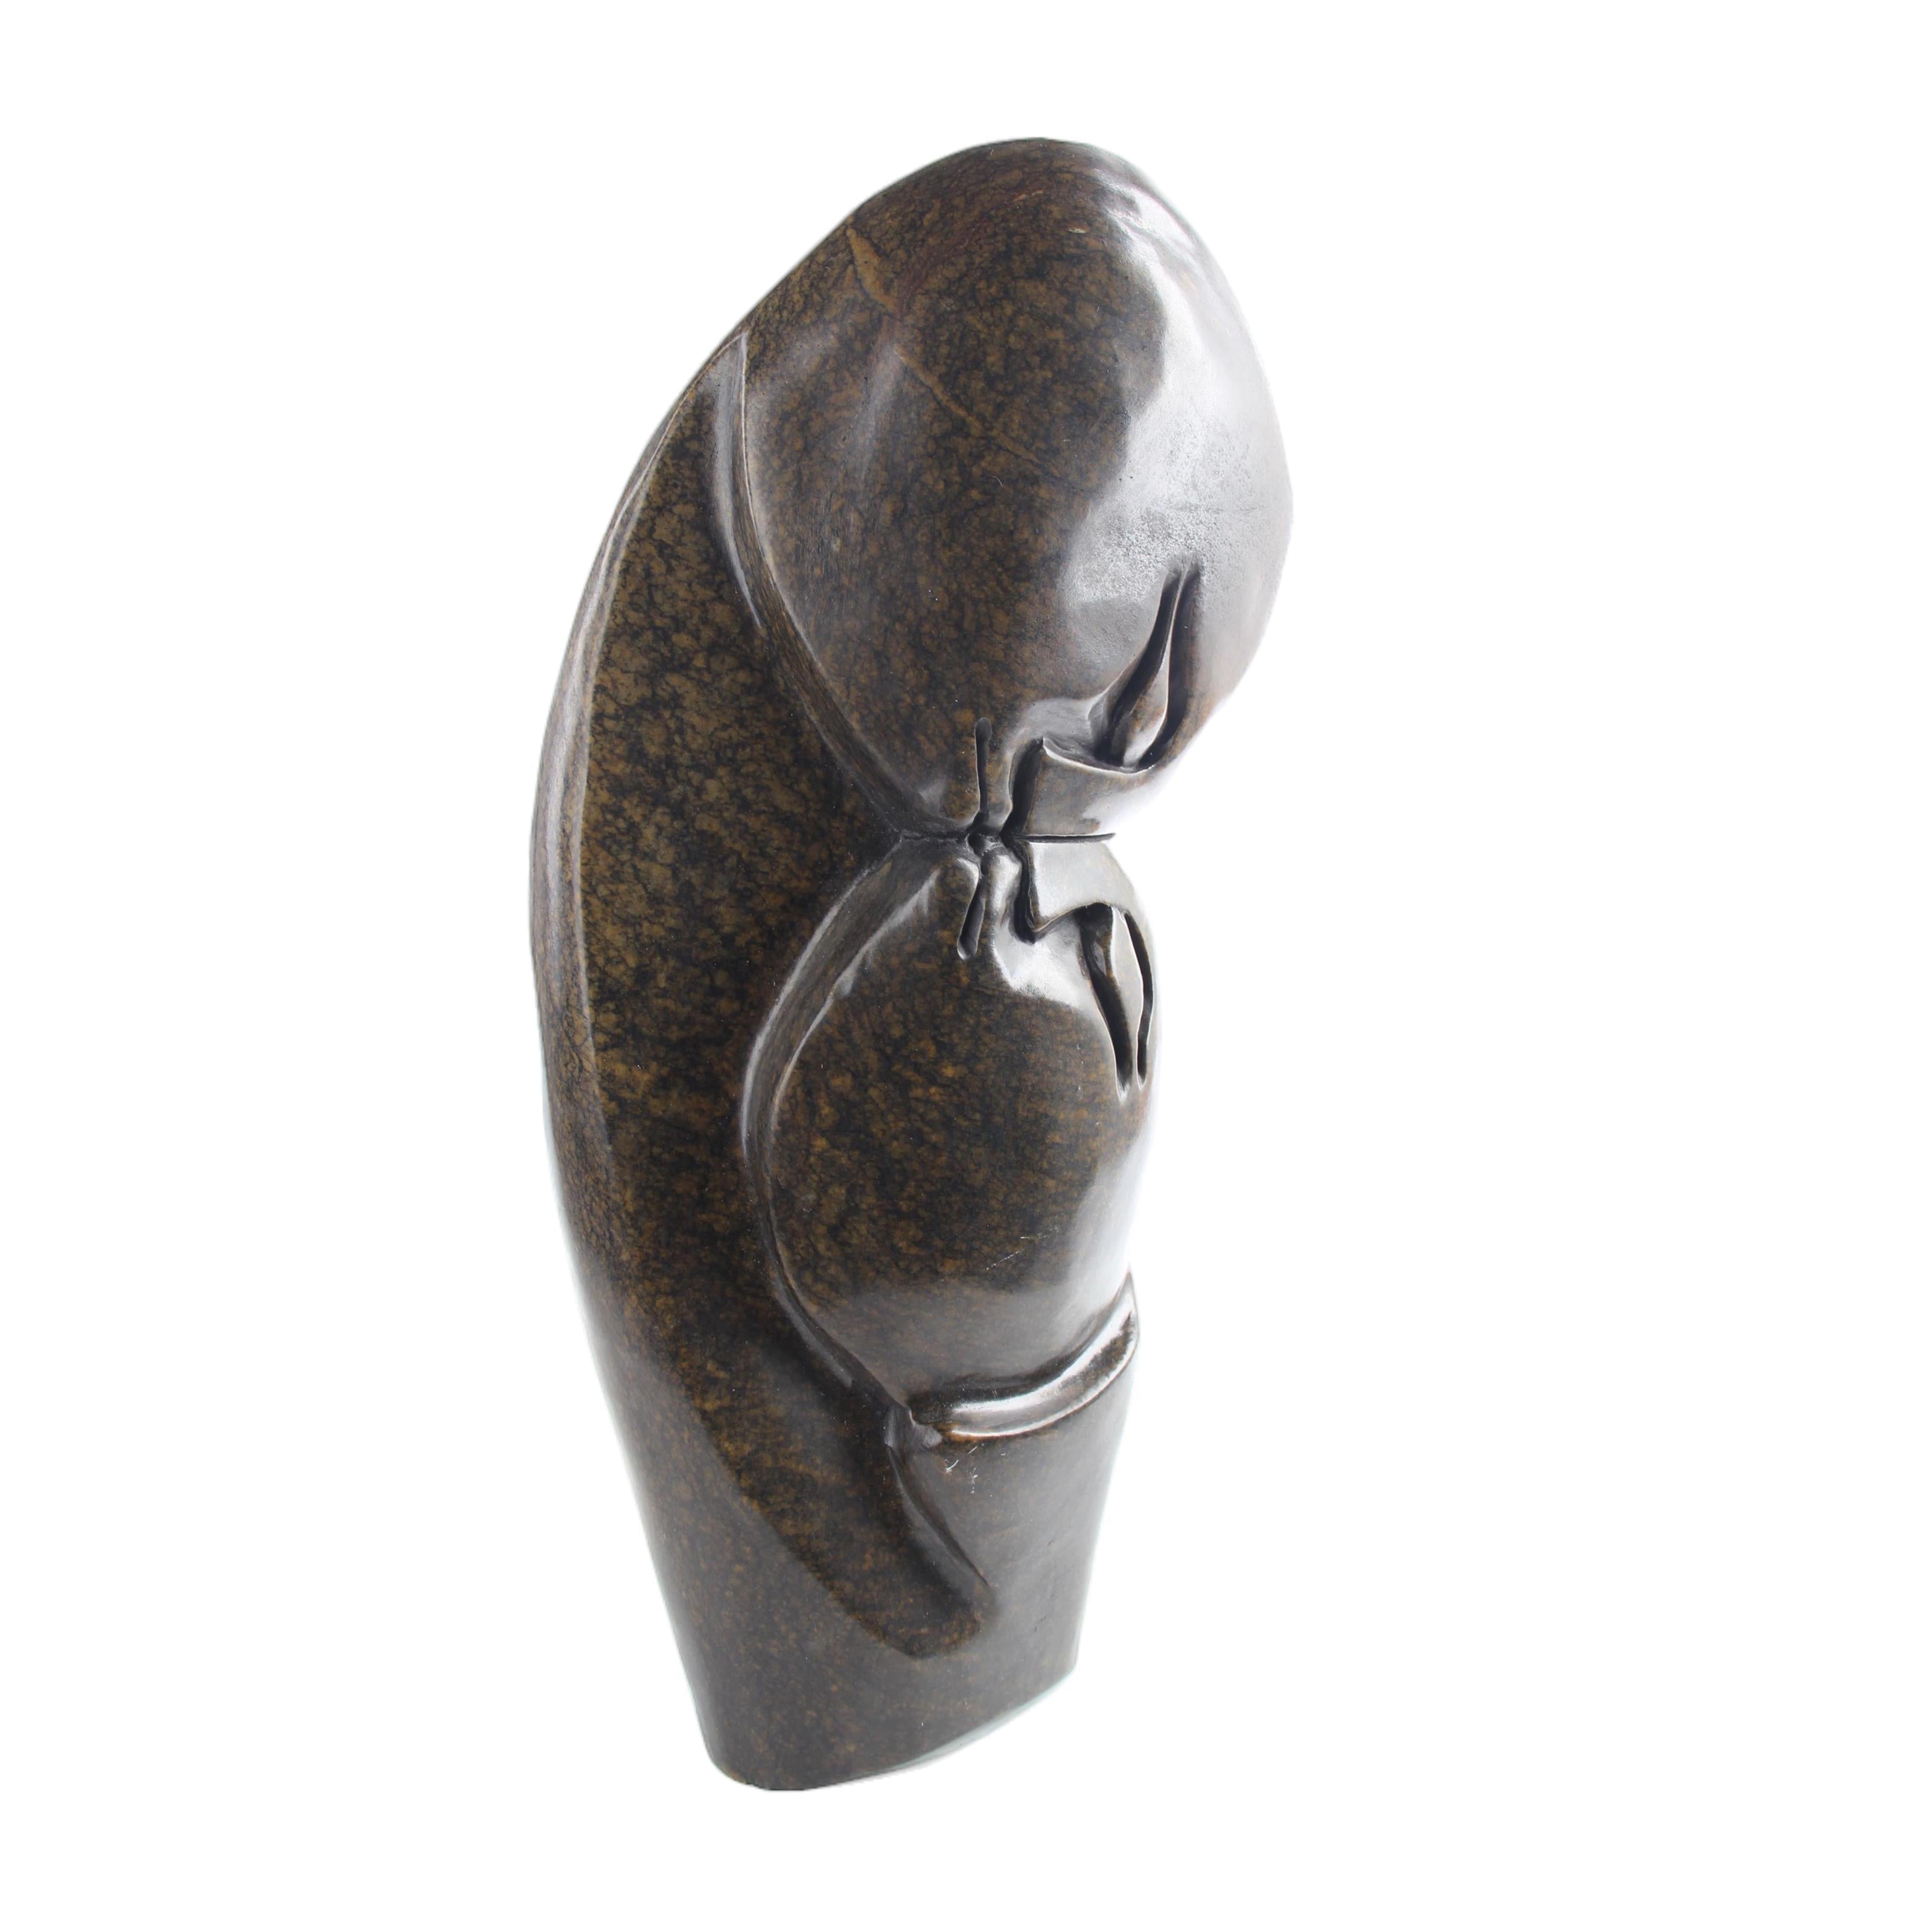 Shona Tribe Serpentine Stone Lovers ~16.5" Tall - Lovers